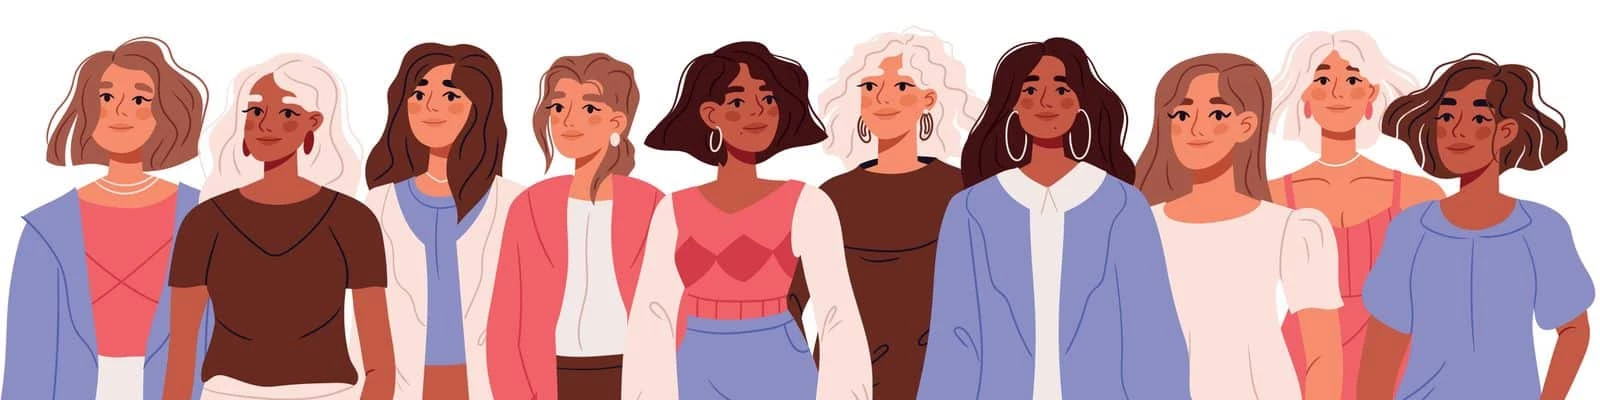 Illustration of ten diverse strong women standing side by side 